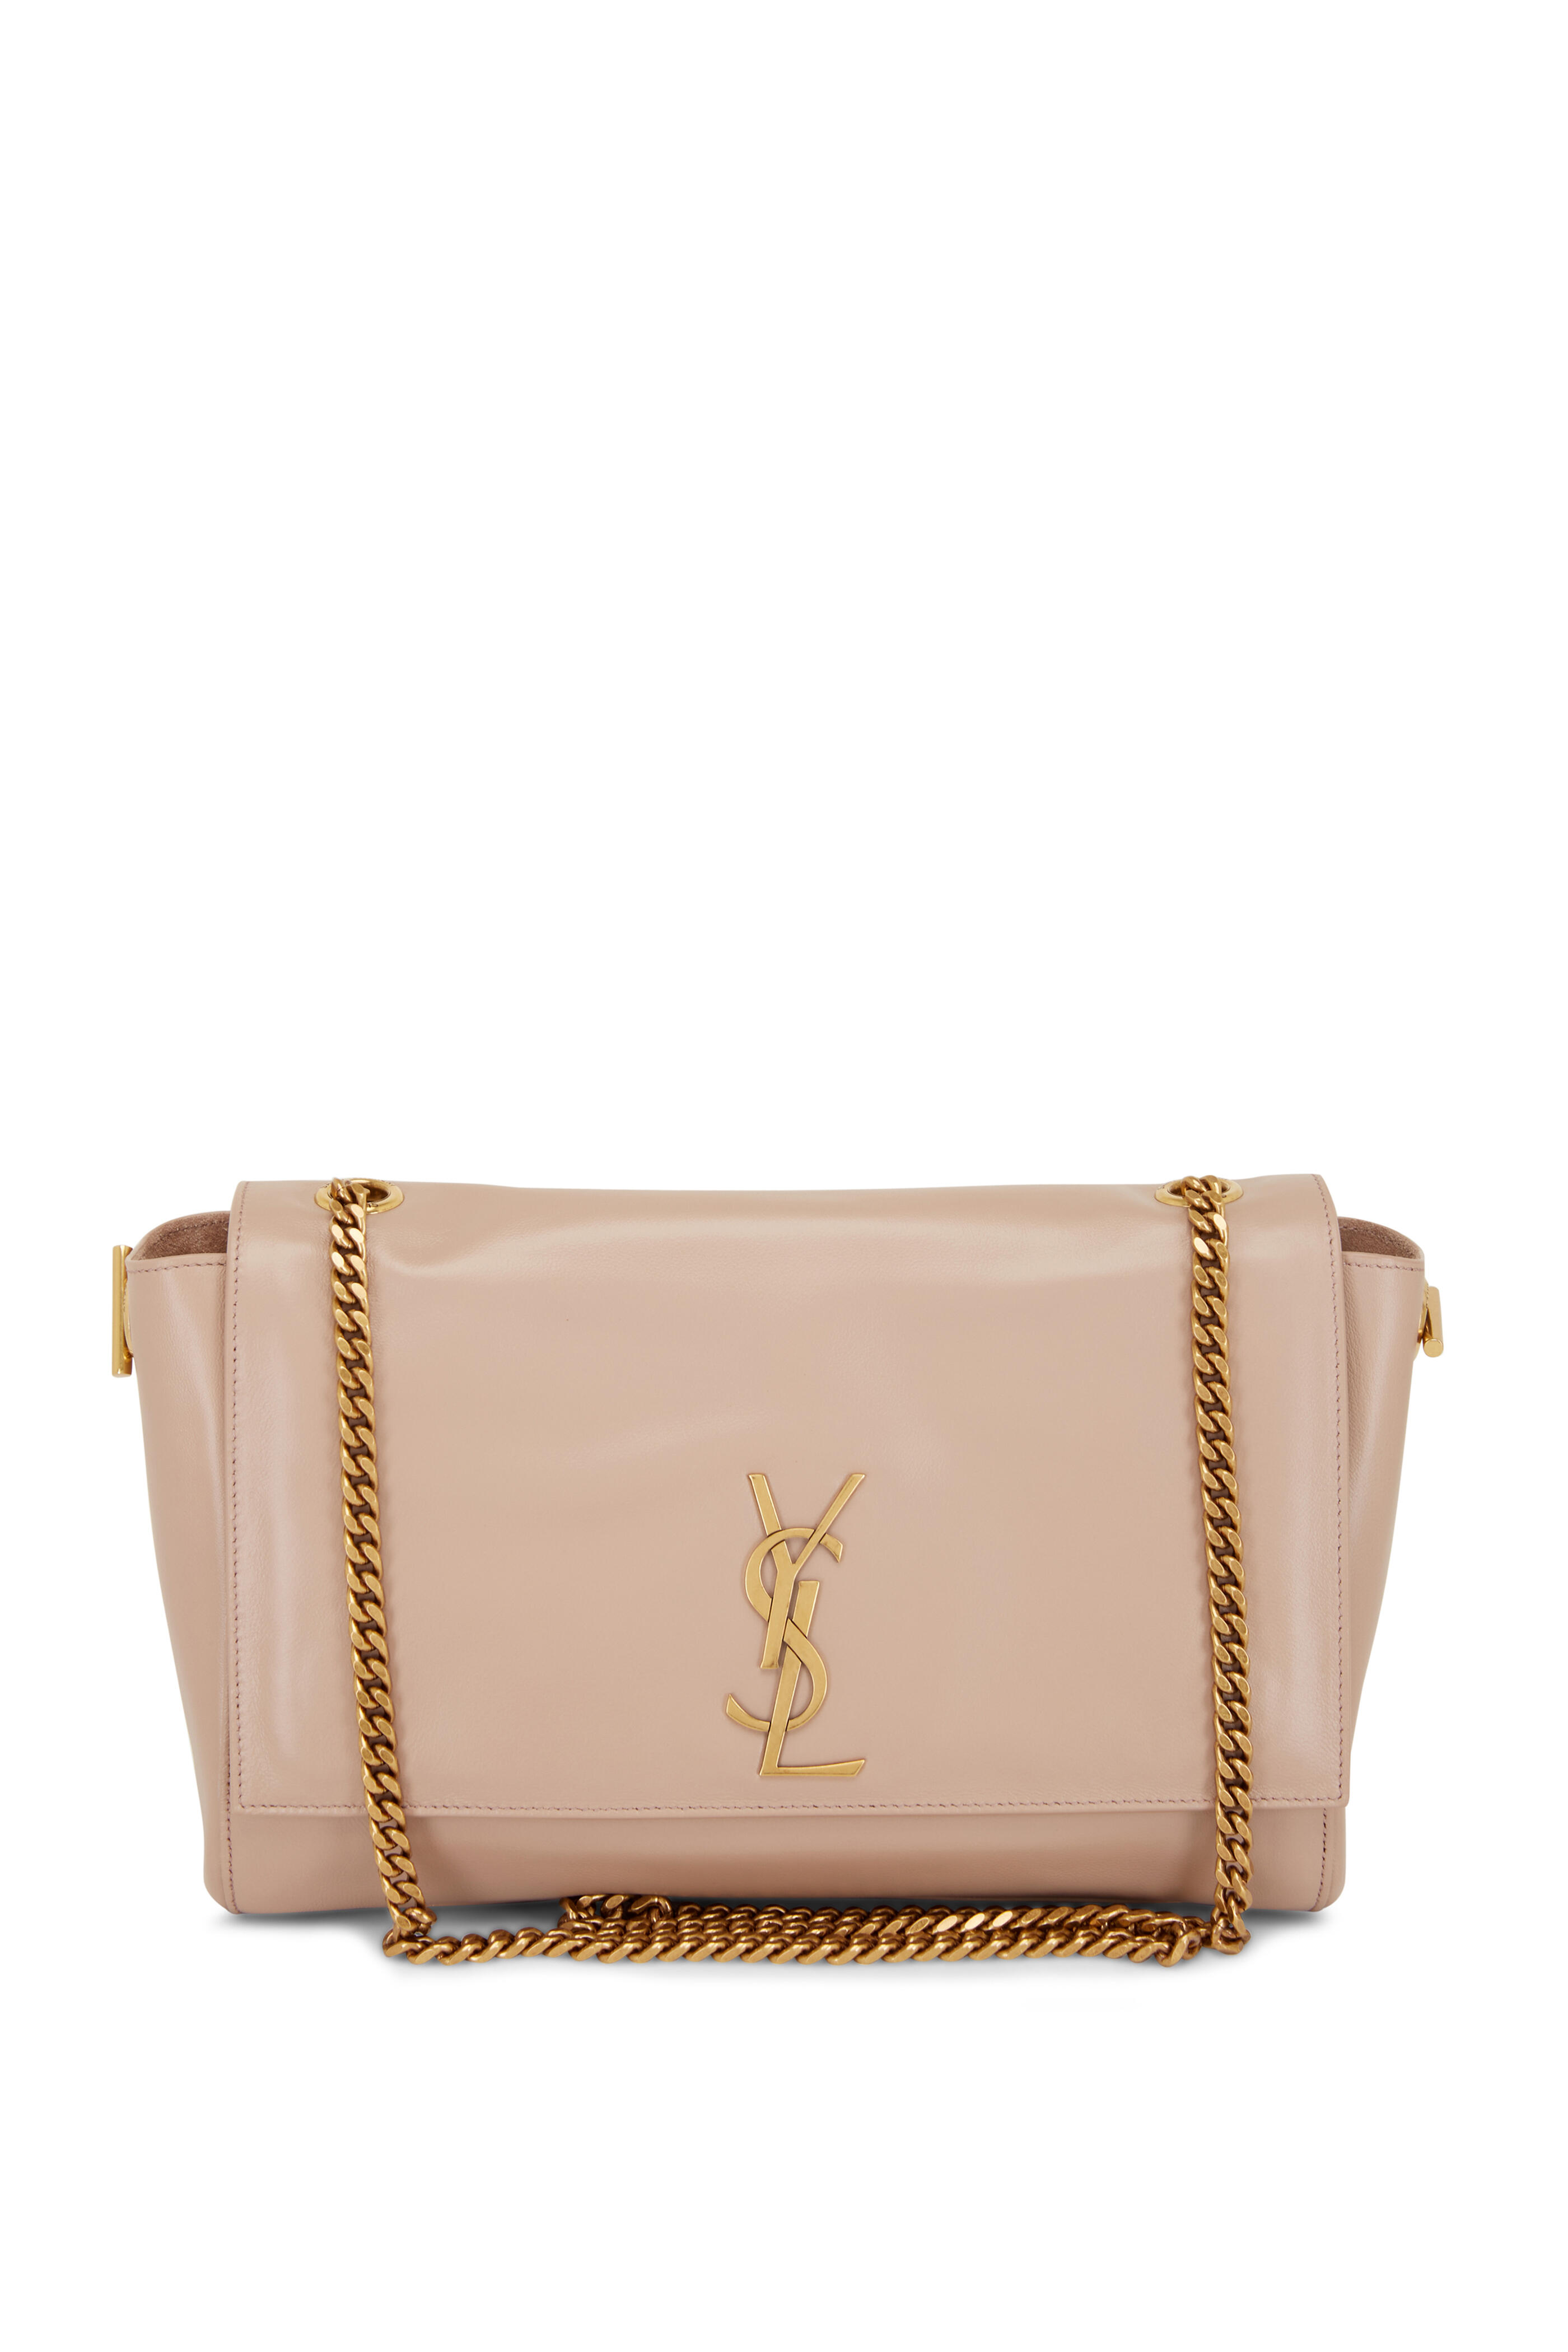 Saint Laurent Kate Tassel Chain Bag Black in Leather with Gold